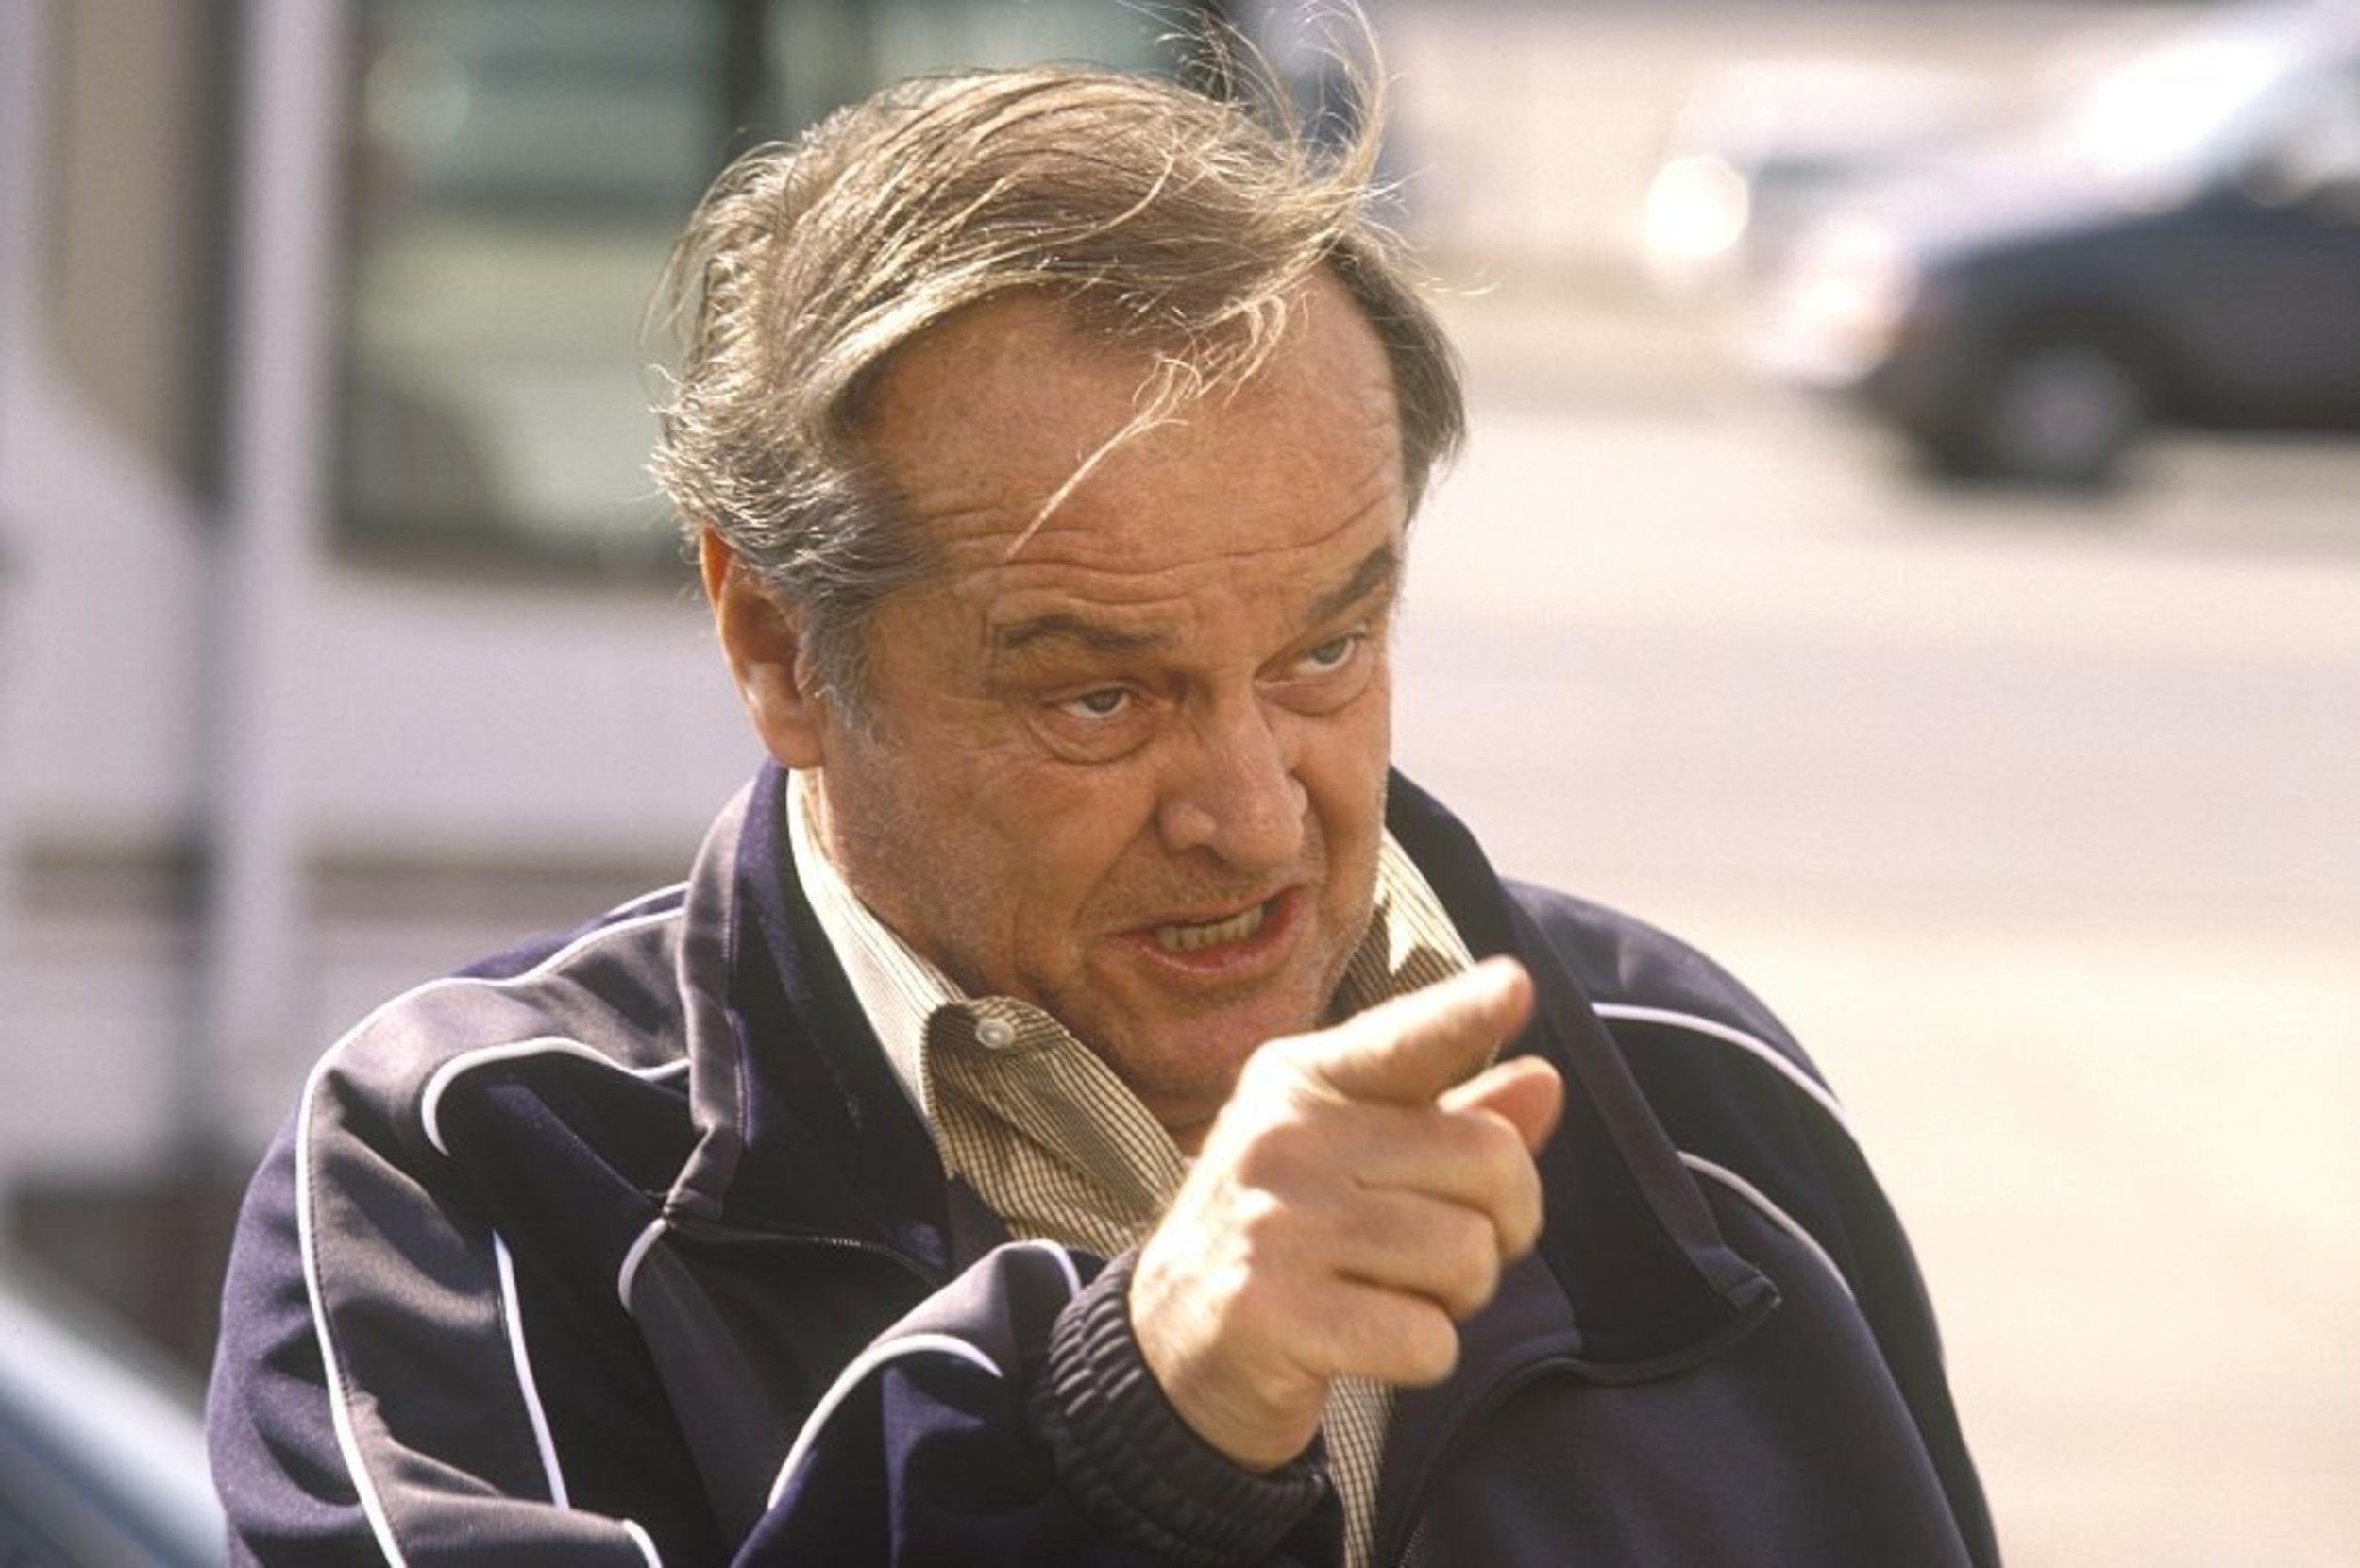 <p><span><span>After films like “Easy Rider,” “Chinatown,” “One Flew Over the Cuckoo’s Nest,” “The Shining,” and “A Few Good Men,” casting Jack Nicholson as a sad, lonely, and vulnerable man like the titular character in 2002’s “About Schmidt” seemed impossible. Yet Nicholson brought heart and sensitivity to his touching role in the dramedy, so much so that he surprisingly won a Golden Globe for Best Performance by an Actor in a Motion Picture – Drama. The win even shocked Nicholson himself, but for a different reason. In his acceptance speech, the actor quipped, “I'm a little surprised. I thought we made a comedy.”</span></span></p><p><a href='https://www.msn.com/en-us/community/channel/vid-cj9pqbr0vn9in2b6ddcd8sfgpfq6x6utp44fssrv6mc2gtybw0us'>Follow us on MSN to see more of our exclusive entertainment content.</a></p>